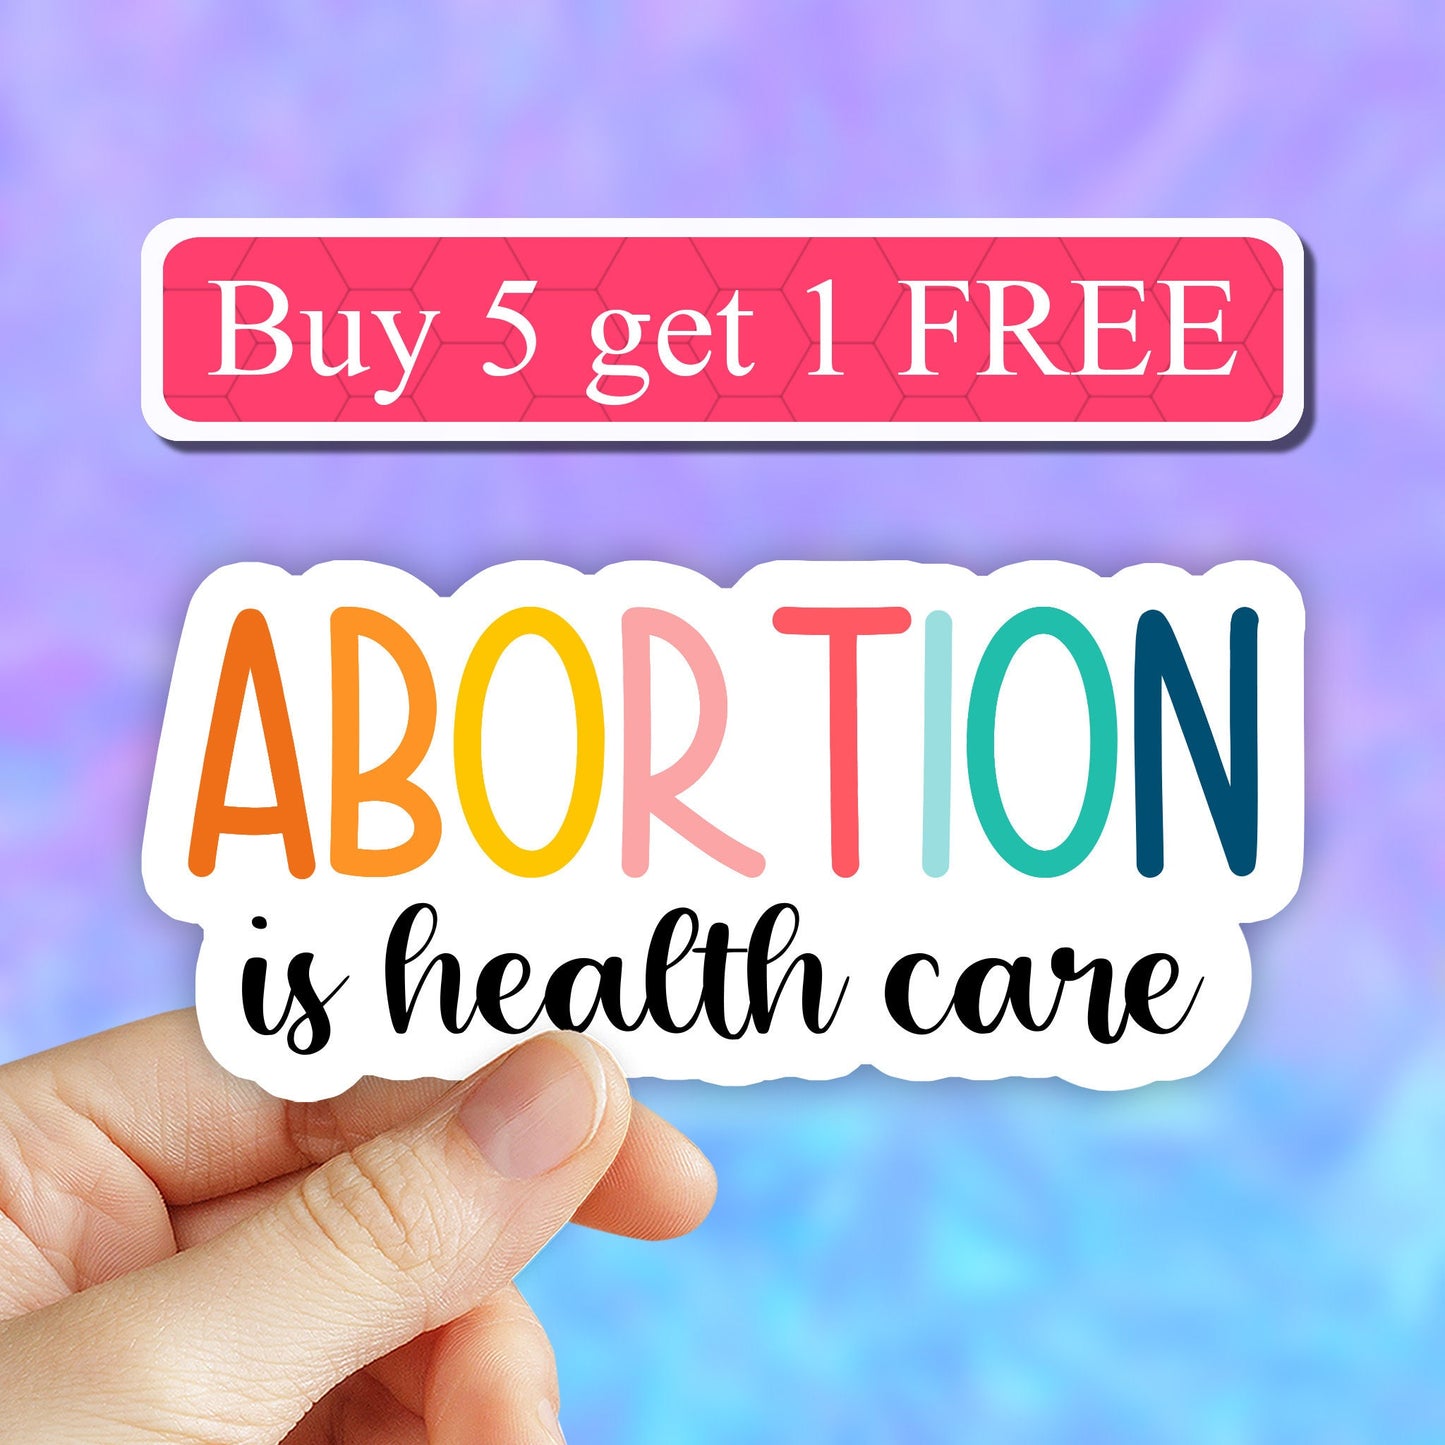 Abortion is Healthcare Sticker, Pro Choice Sticker, Reproductive Rights Sticker, Women Rights Sticker, Roe v Wade Sticker, Laptop stickers